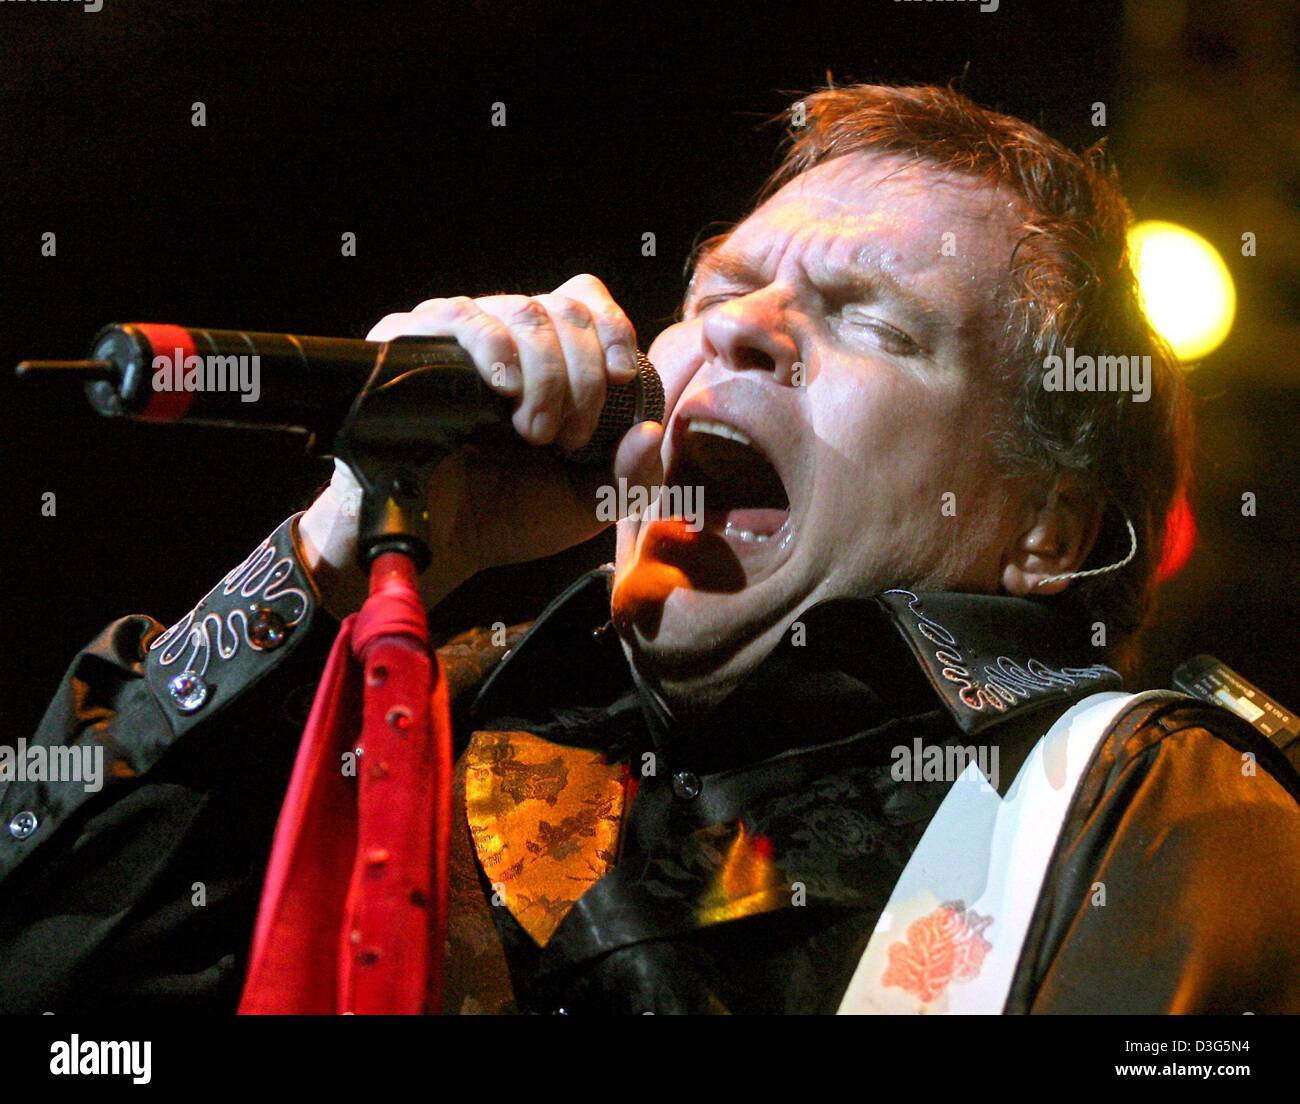 (dpa files) - Popstar Meat Loaf performs during a concert in Halle, Germany, 25 October 2003. After collapsing on stage during a show in London a week ago, Meat Loaf is recovering from a heart surgery. The 52-year-old singer is out of hospital and hopes to resume his tour on Sunday, 30 November 2003, he said. Stock Photo